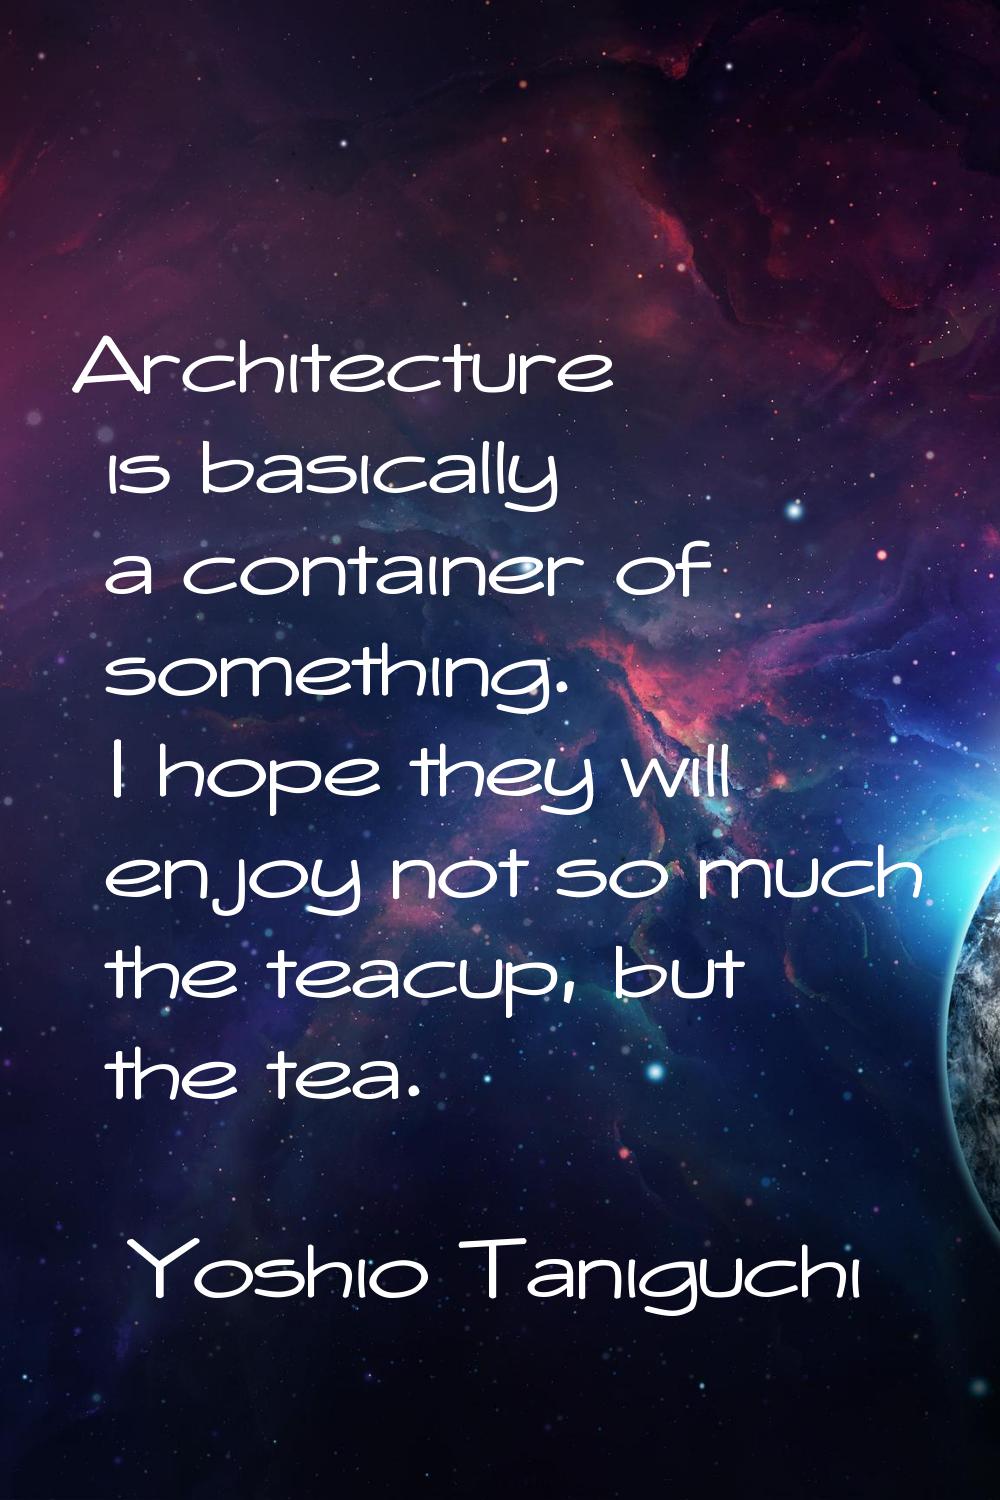 Architecture is basically a container of something. I hope they will enjoy not so much the teacup, 